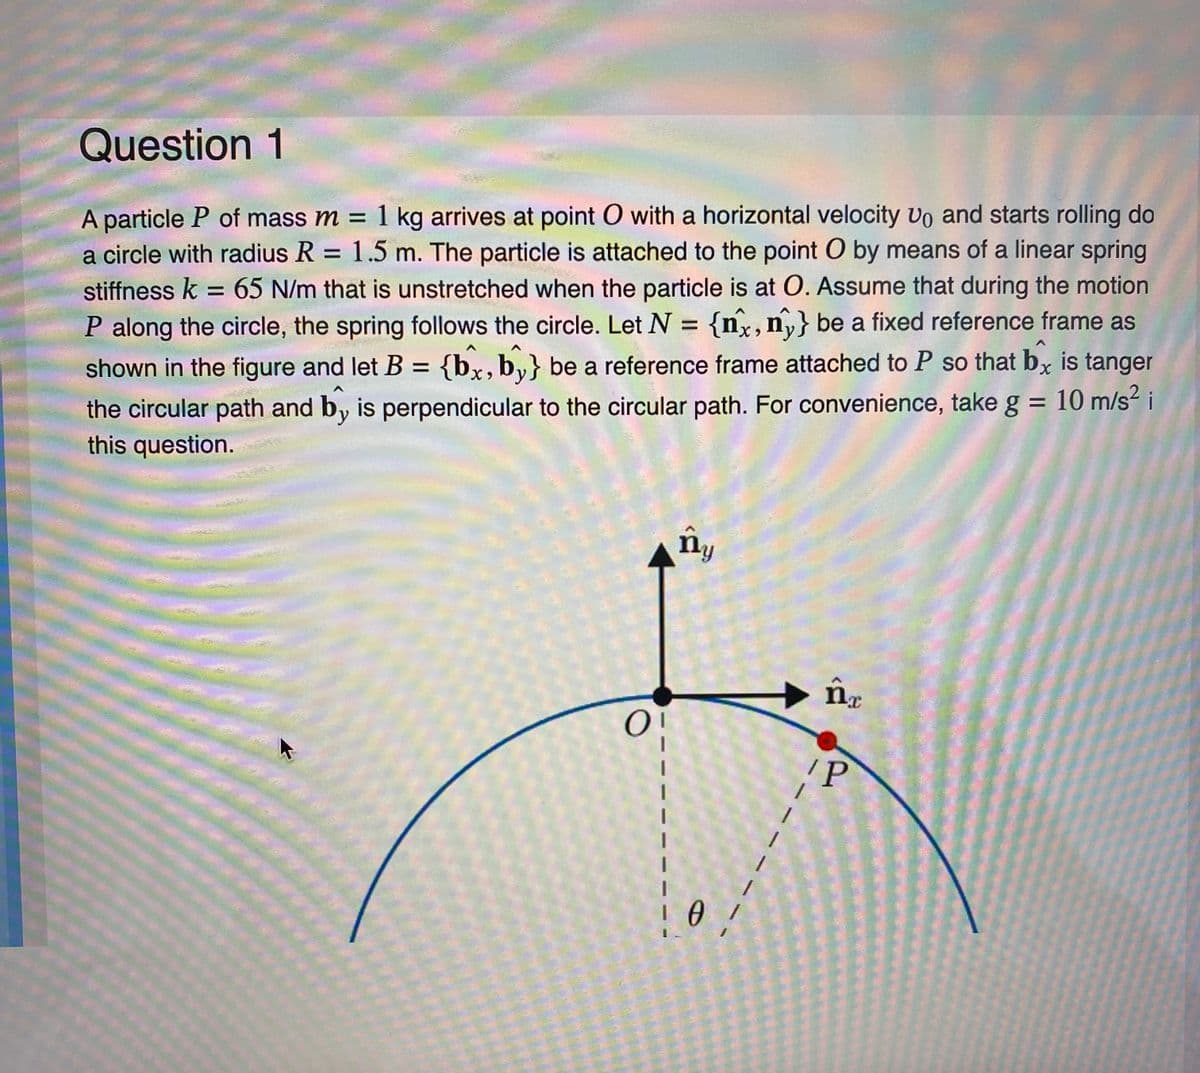 Question 1
A particle P of mass m = 1 kg arrives at point O with a horizontal velocity Uo and starts rolling do
a circle with radius R = 1.5 m. The particle is attached to the point O by means of a linear spring
stiffness k = 65 N/m that is unstretched when the particle is at O. Assume that during the motion
P along the circle, the spring follows the circle. Let N = {nx, ny} be a fixed reference frame as
shown the figure and let B = {bx, by} be a reference frame attached to P so that bx is tanger
the circular path and by is perpendicular to the circular path. For convenience, take g = 10 m/s² i
this question.
O¦
ny
0/
nr
P